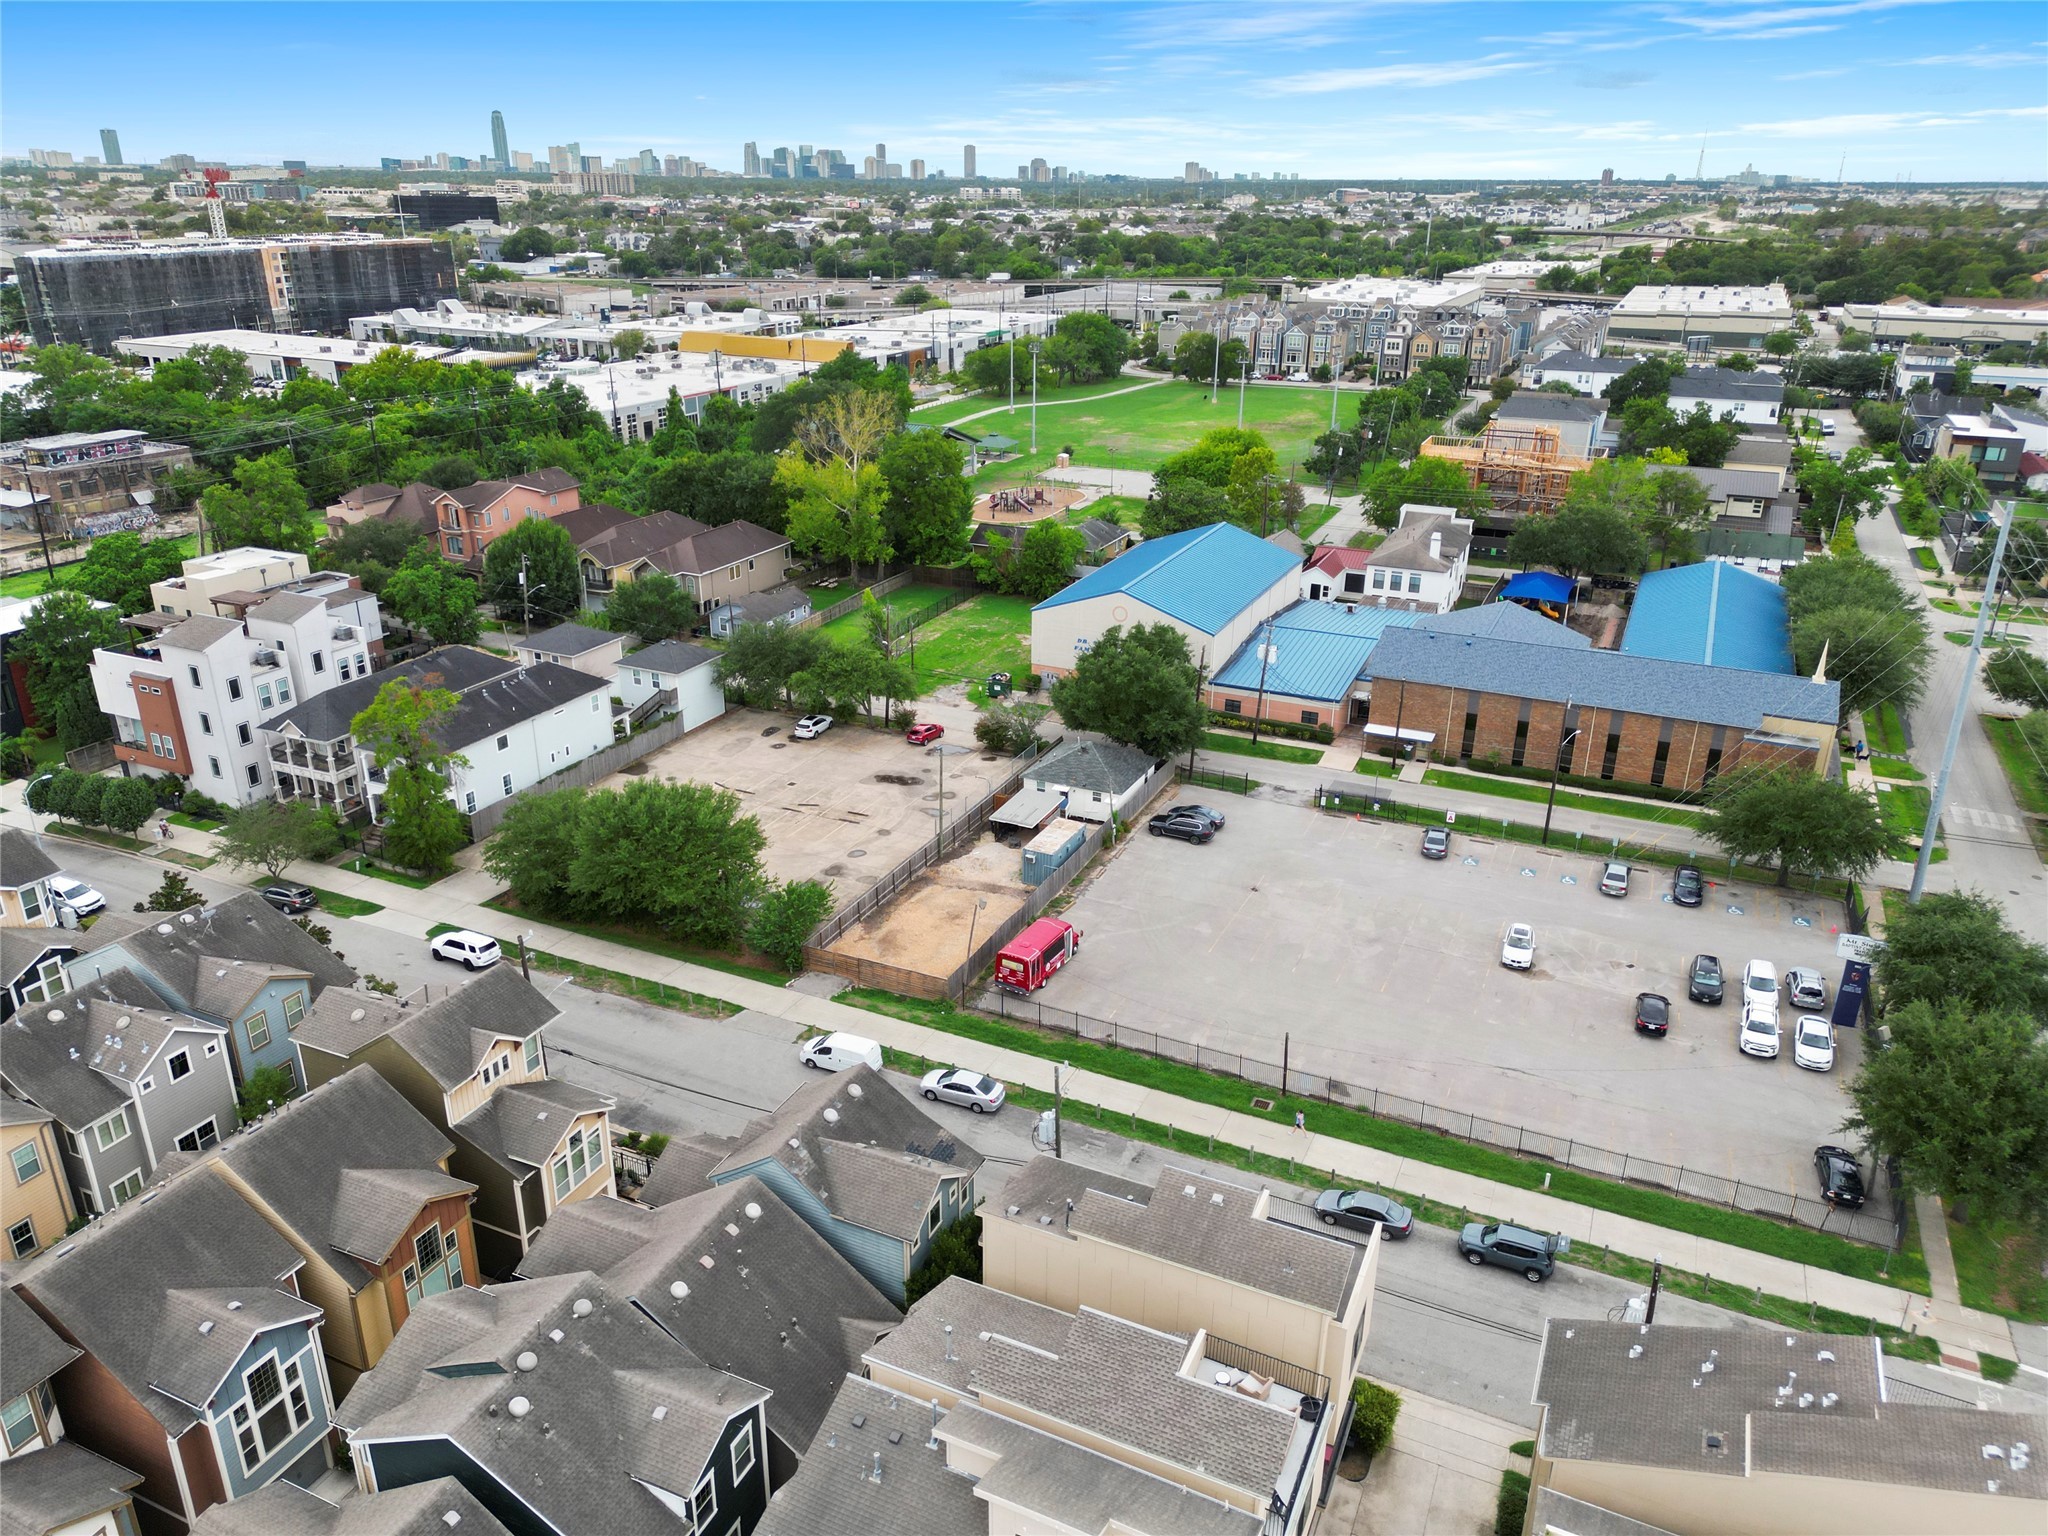 This view shows you how close you are to Lawrence Park and MKT (White buildings to the left of the park).  By the way, MKT is where the Compass Heights office is.